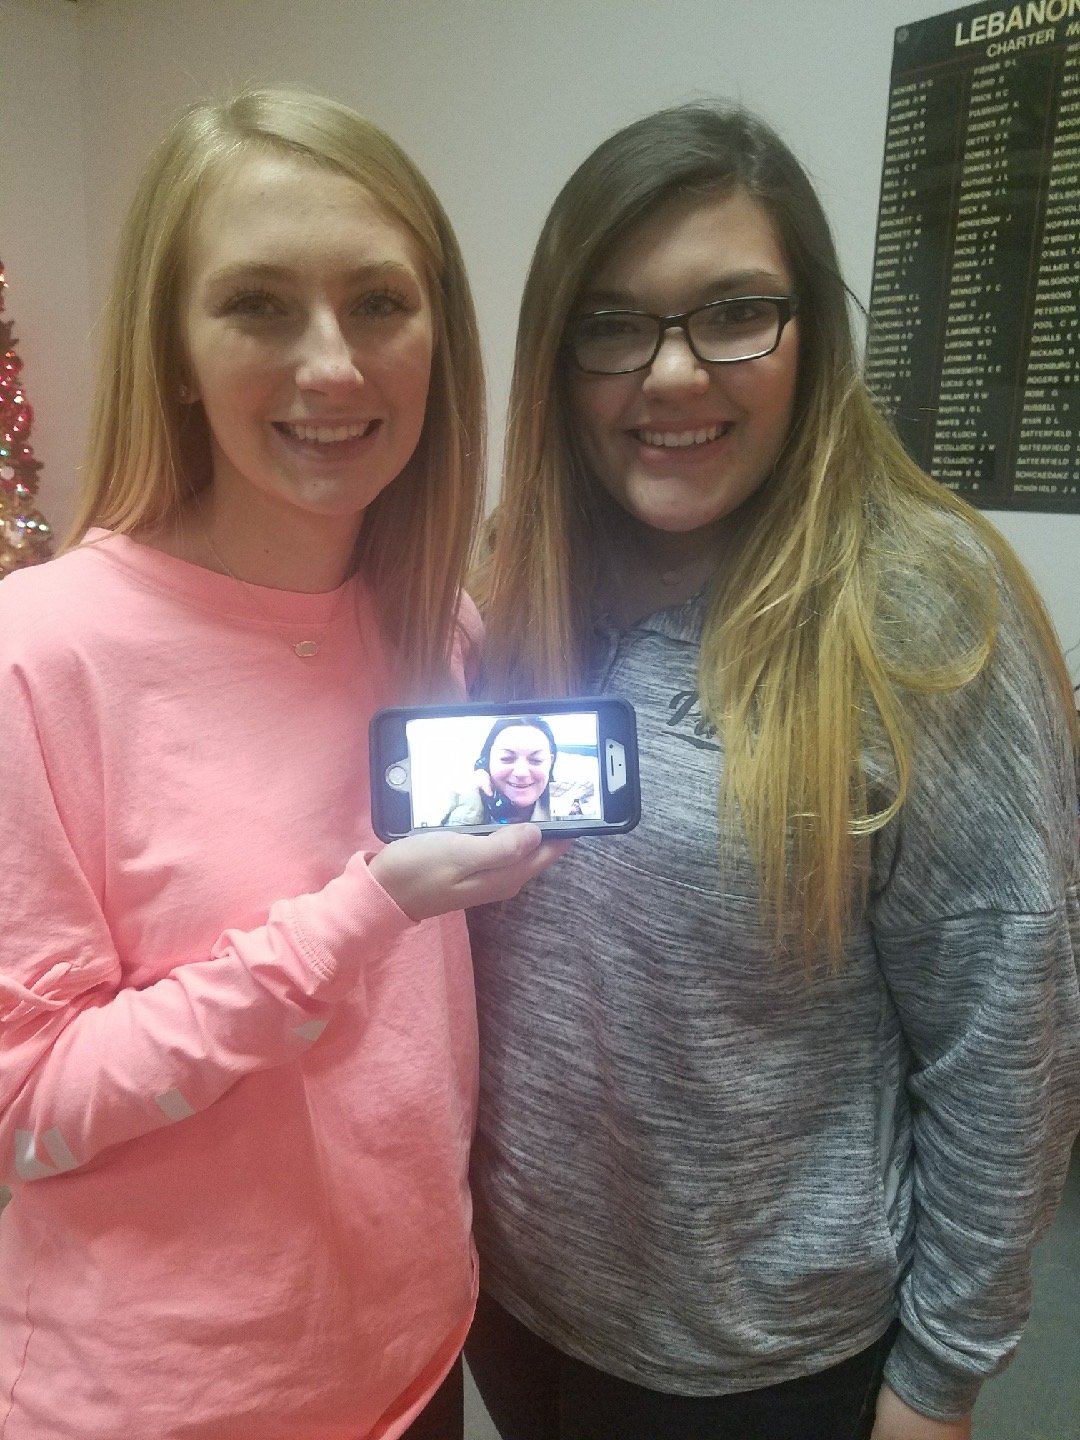 Jessica Antunez’s teenage daughters on a video visit with their mother, on Christmas 2017.